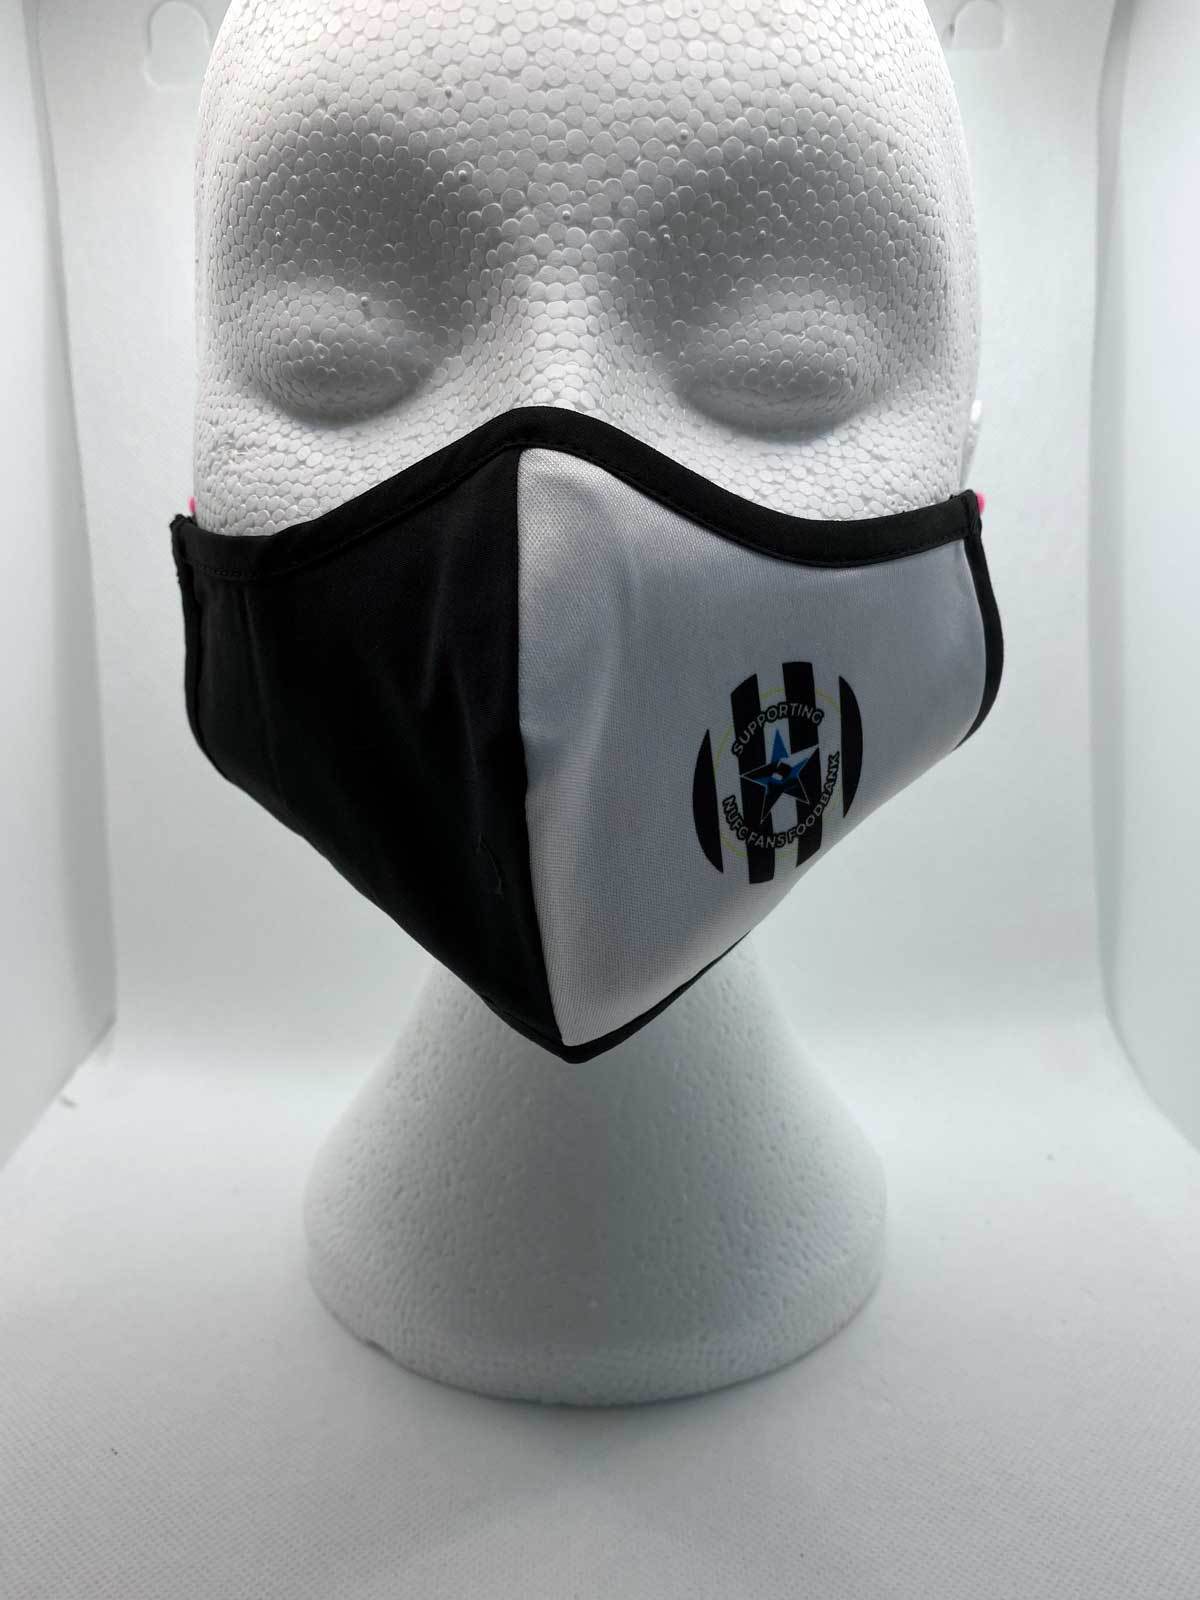 Pedro NUFC Fans Foodbank Adult Mask with Nose Pinch